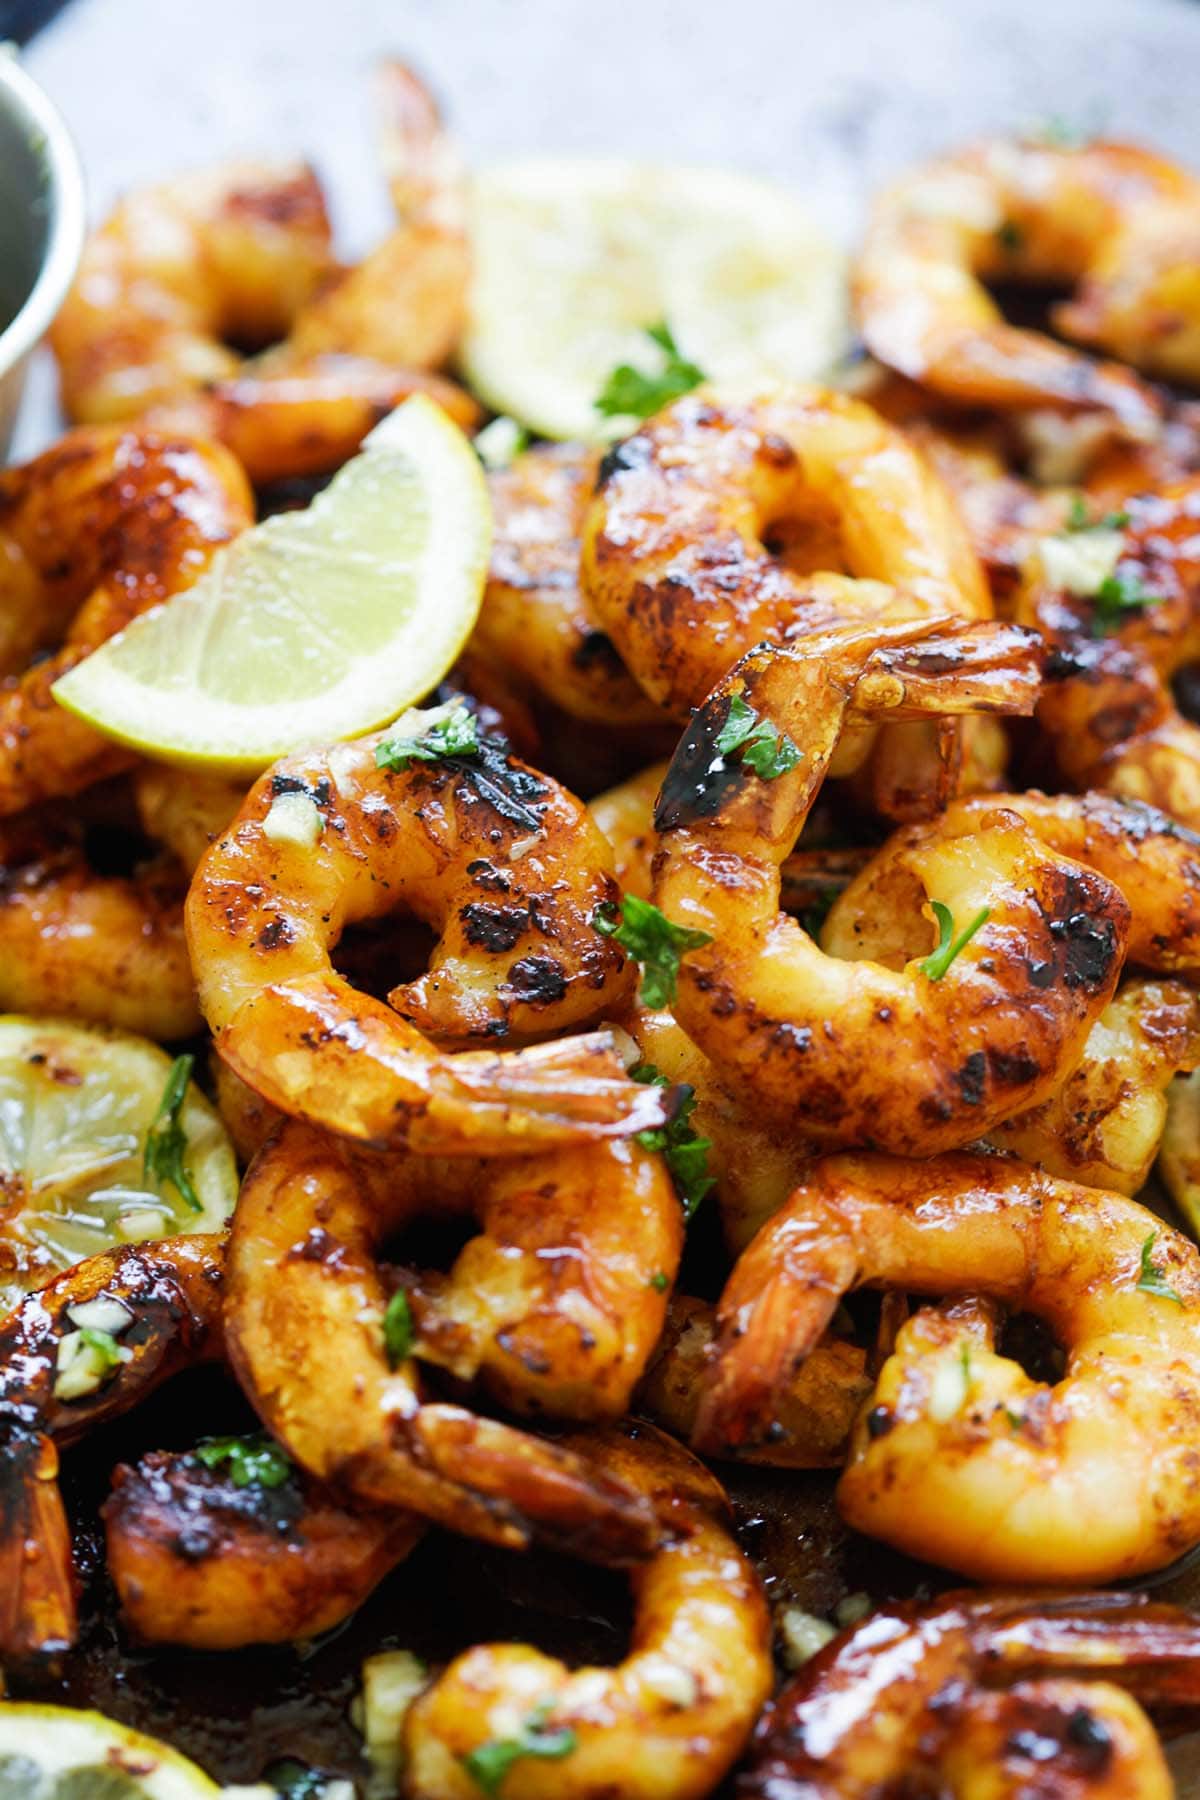 Grilled shrimps with cajun spices and honey, ready to serve.